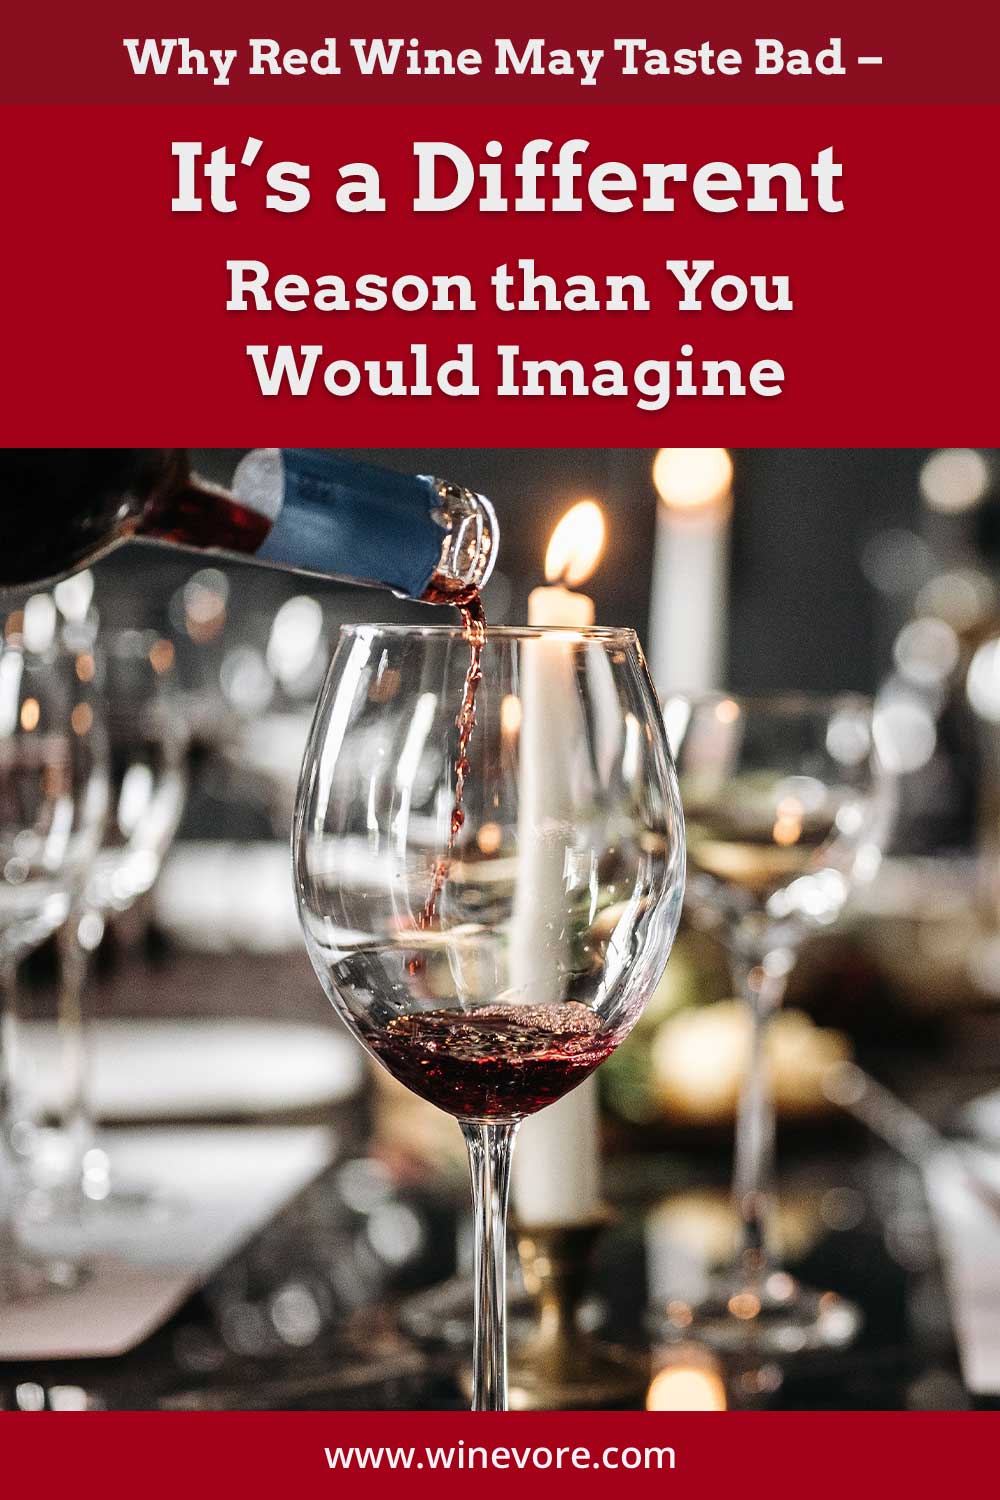 Wine being poured into a glass in a bar - Why Red Wine May Taste Bad?